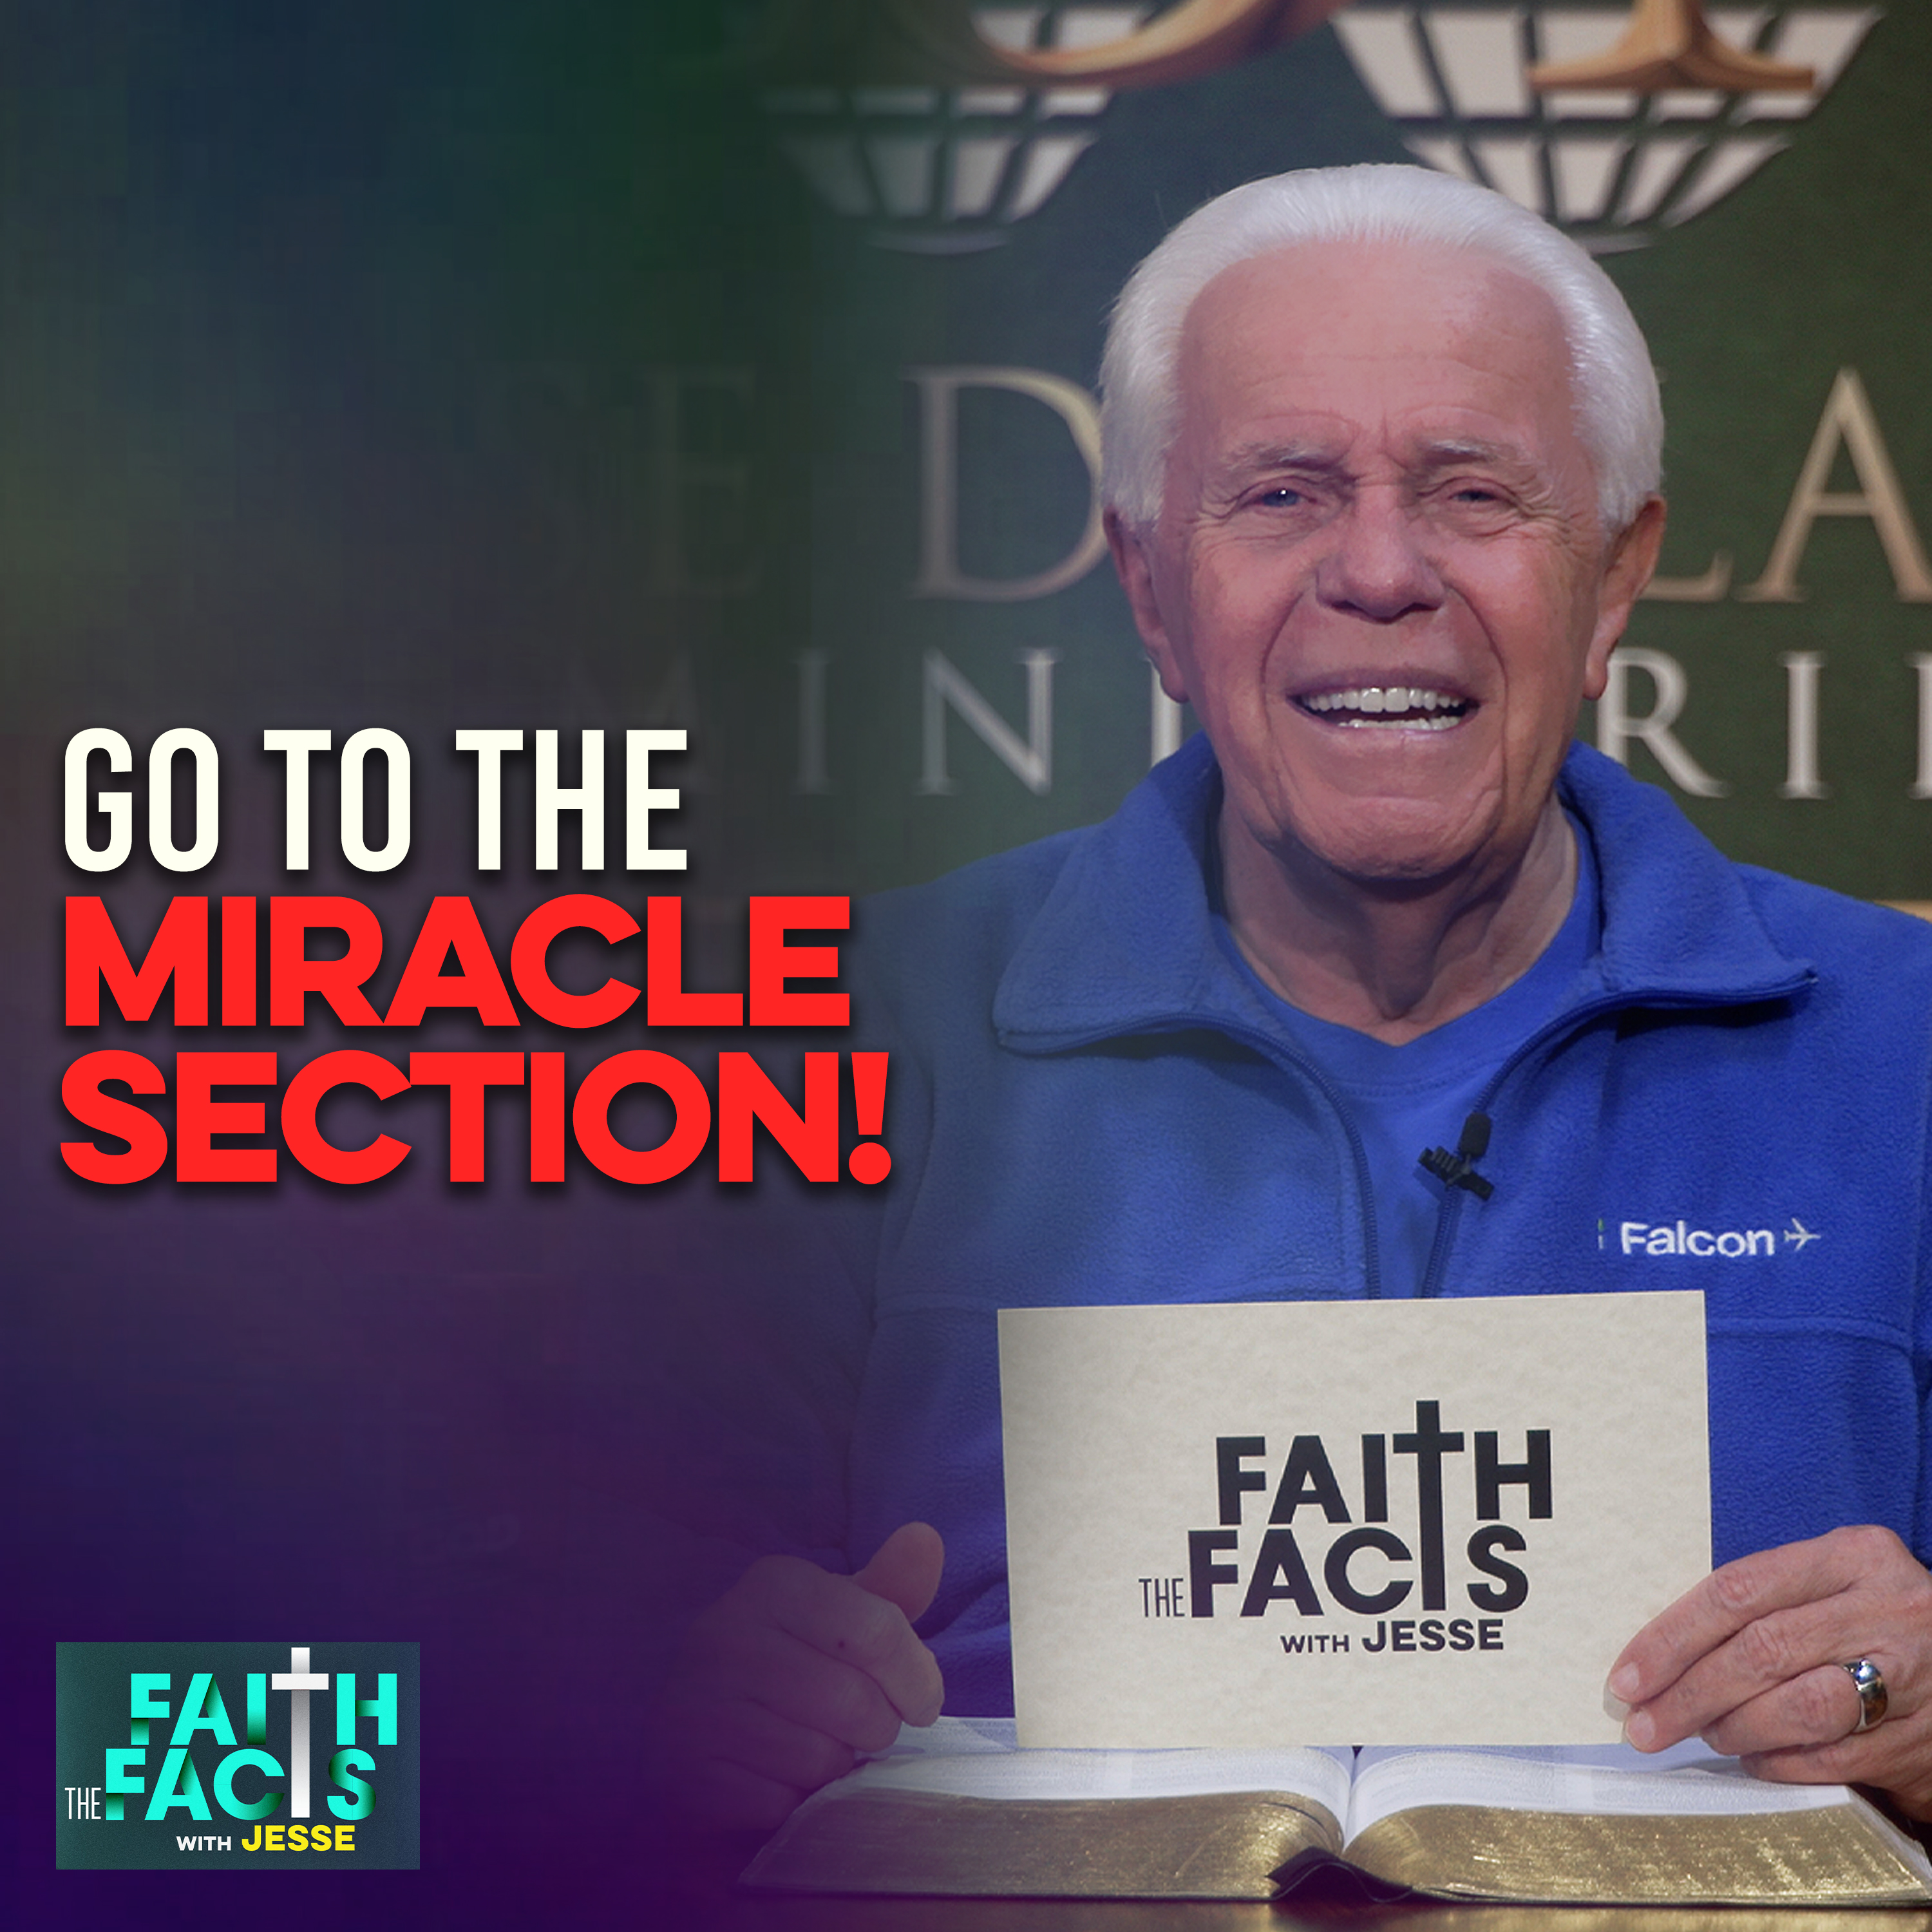 Go To The Miracle Section!